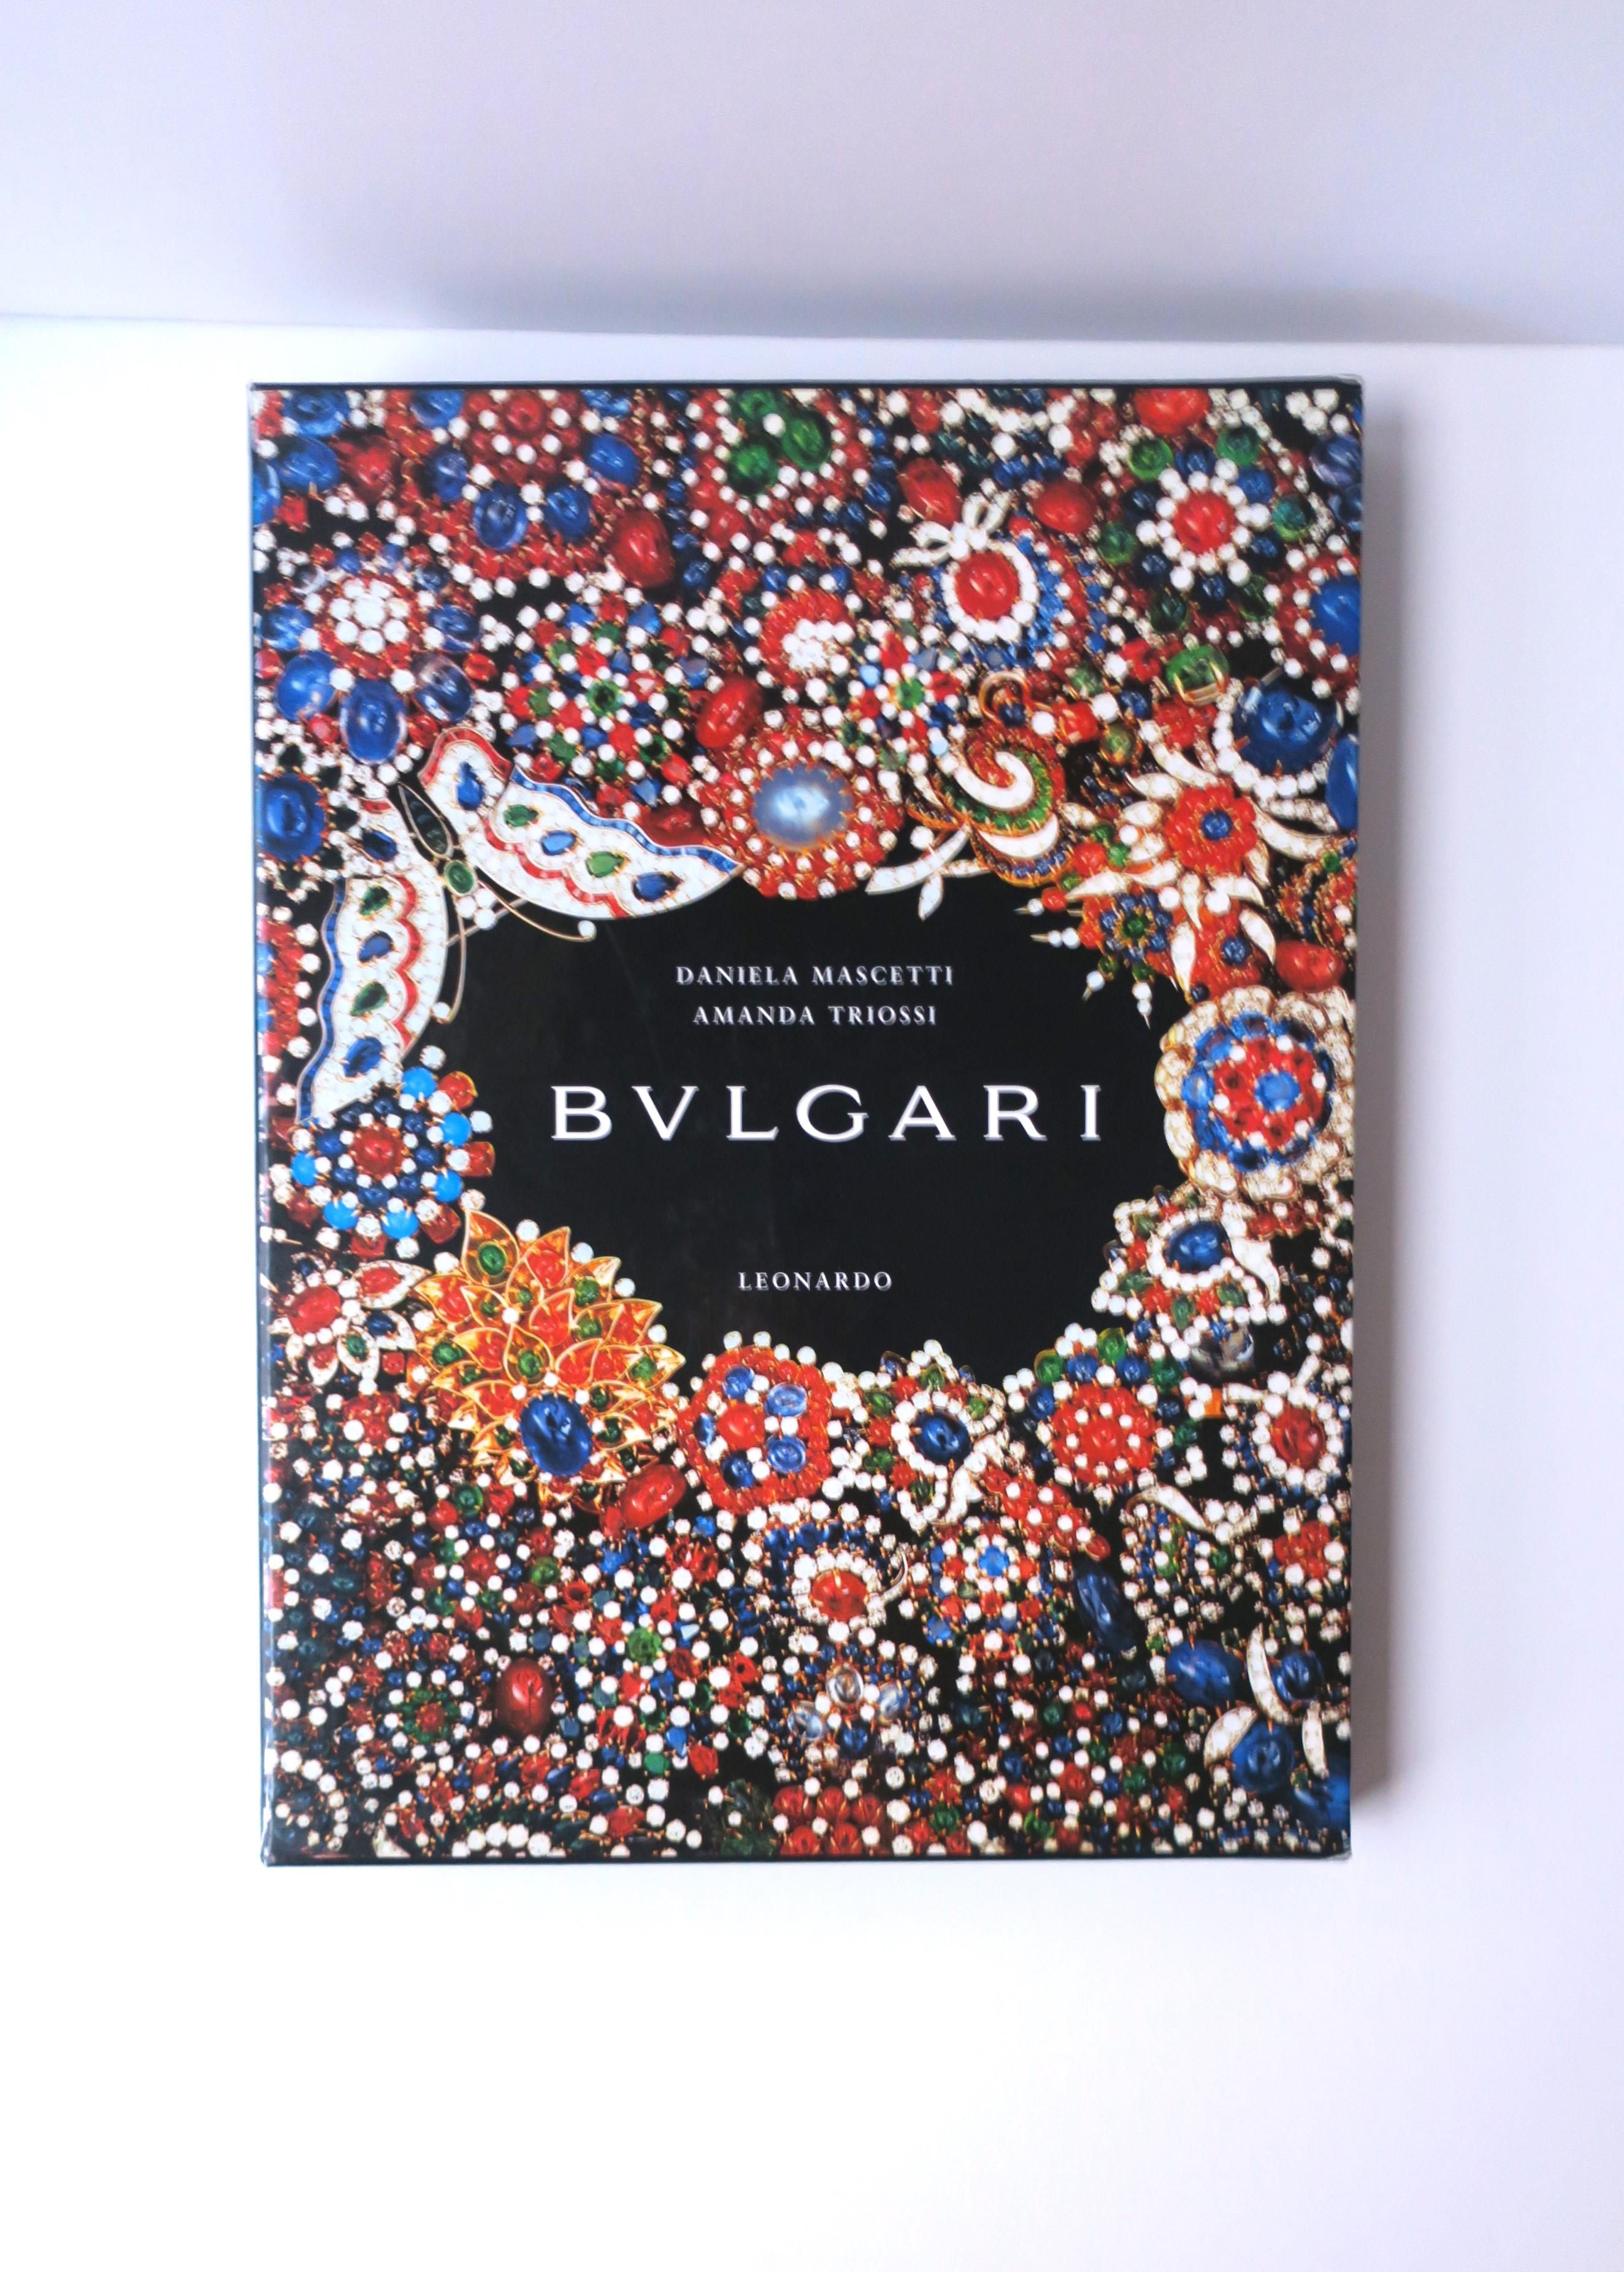 This is a beautiful coffee table (or library book for a home) about the history of the iconic Italian luxury jeweler Bvlgari (or Bulgari), circa 1990s, Italy. Book covers Bulgari's history in creating iconic gorgeous jewelry and its connection,